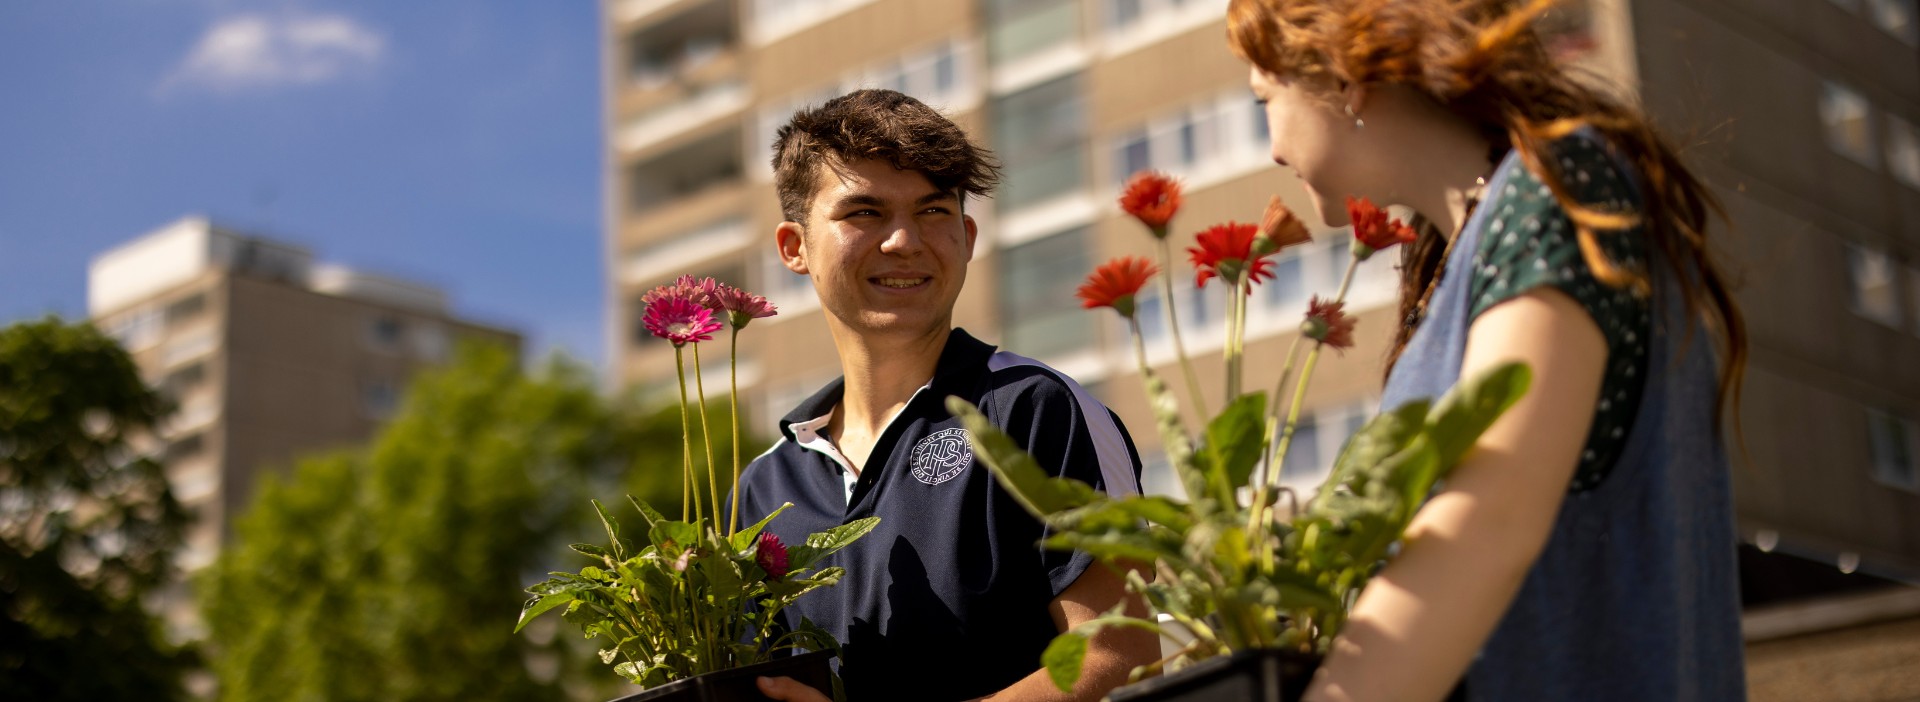 Senior pupils holding pots of flowers at Ibstock Place School.